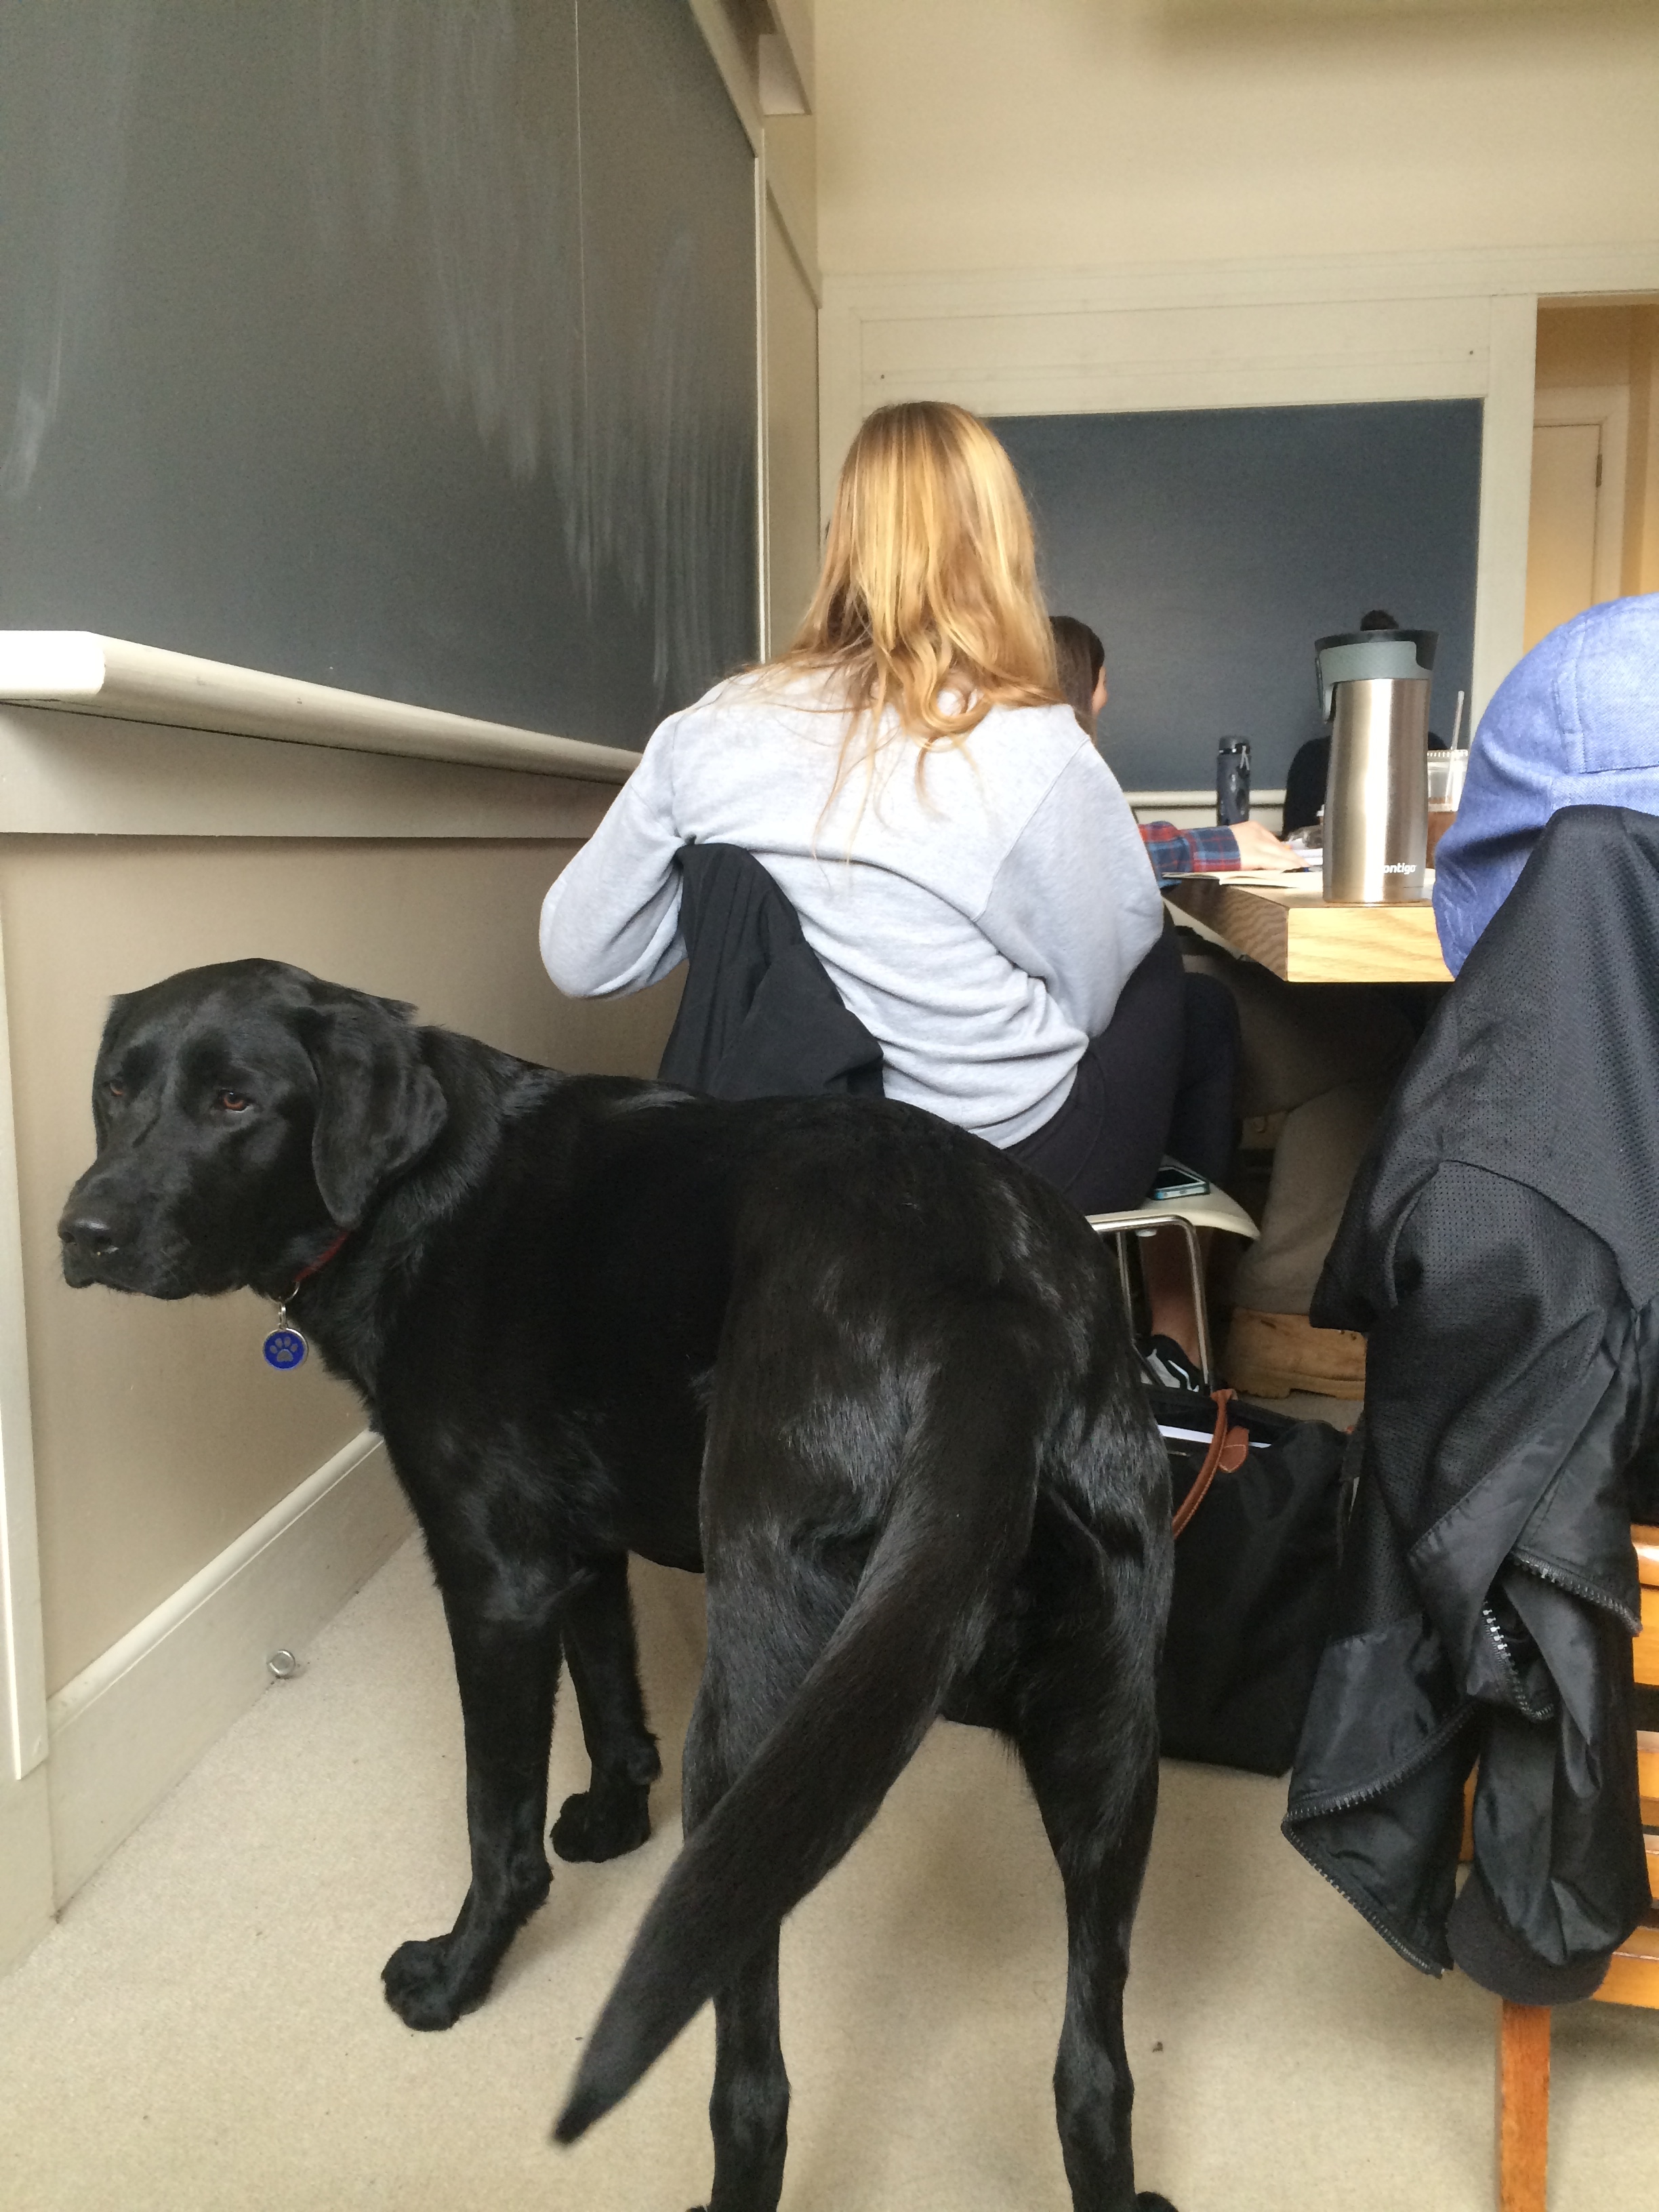 My professor's dog, Scout, joined us in class and became the topic of a story writing exercise 